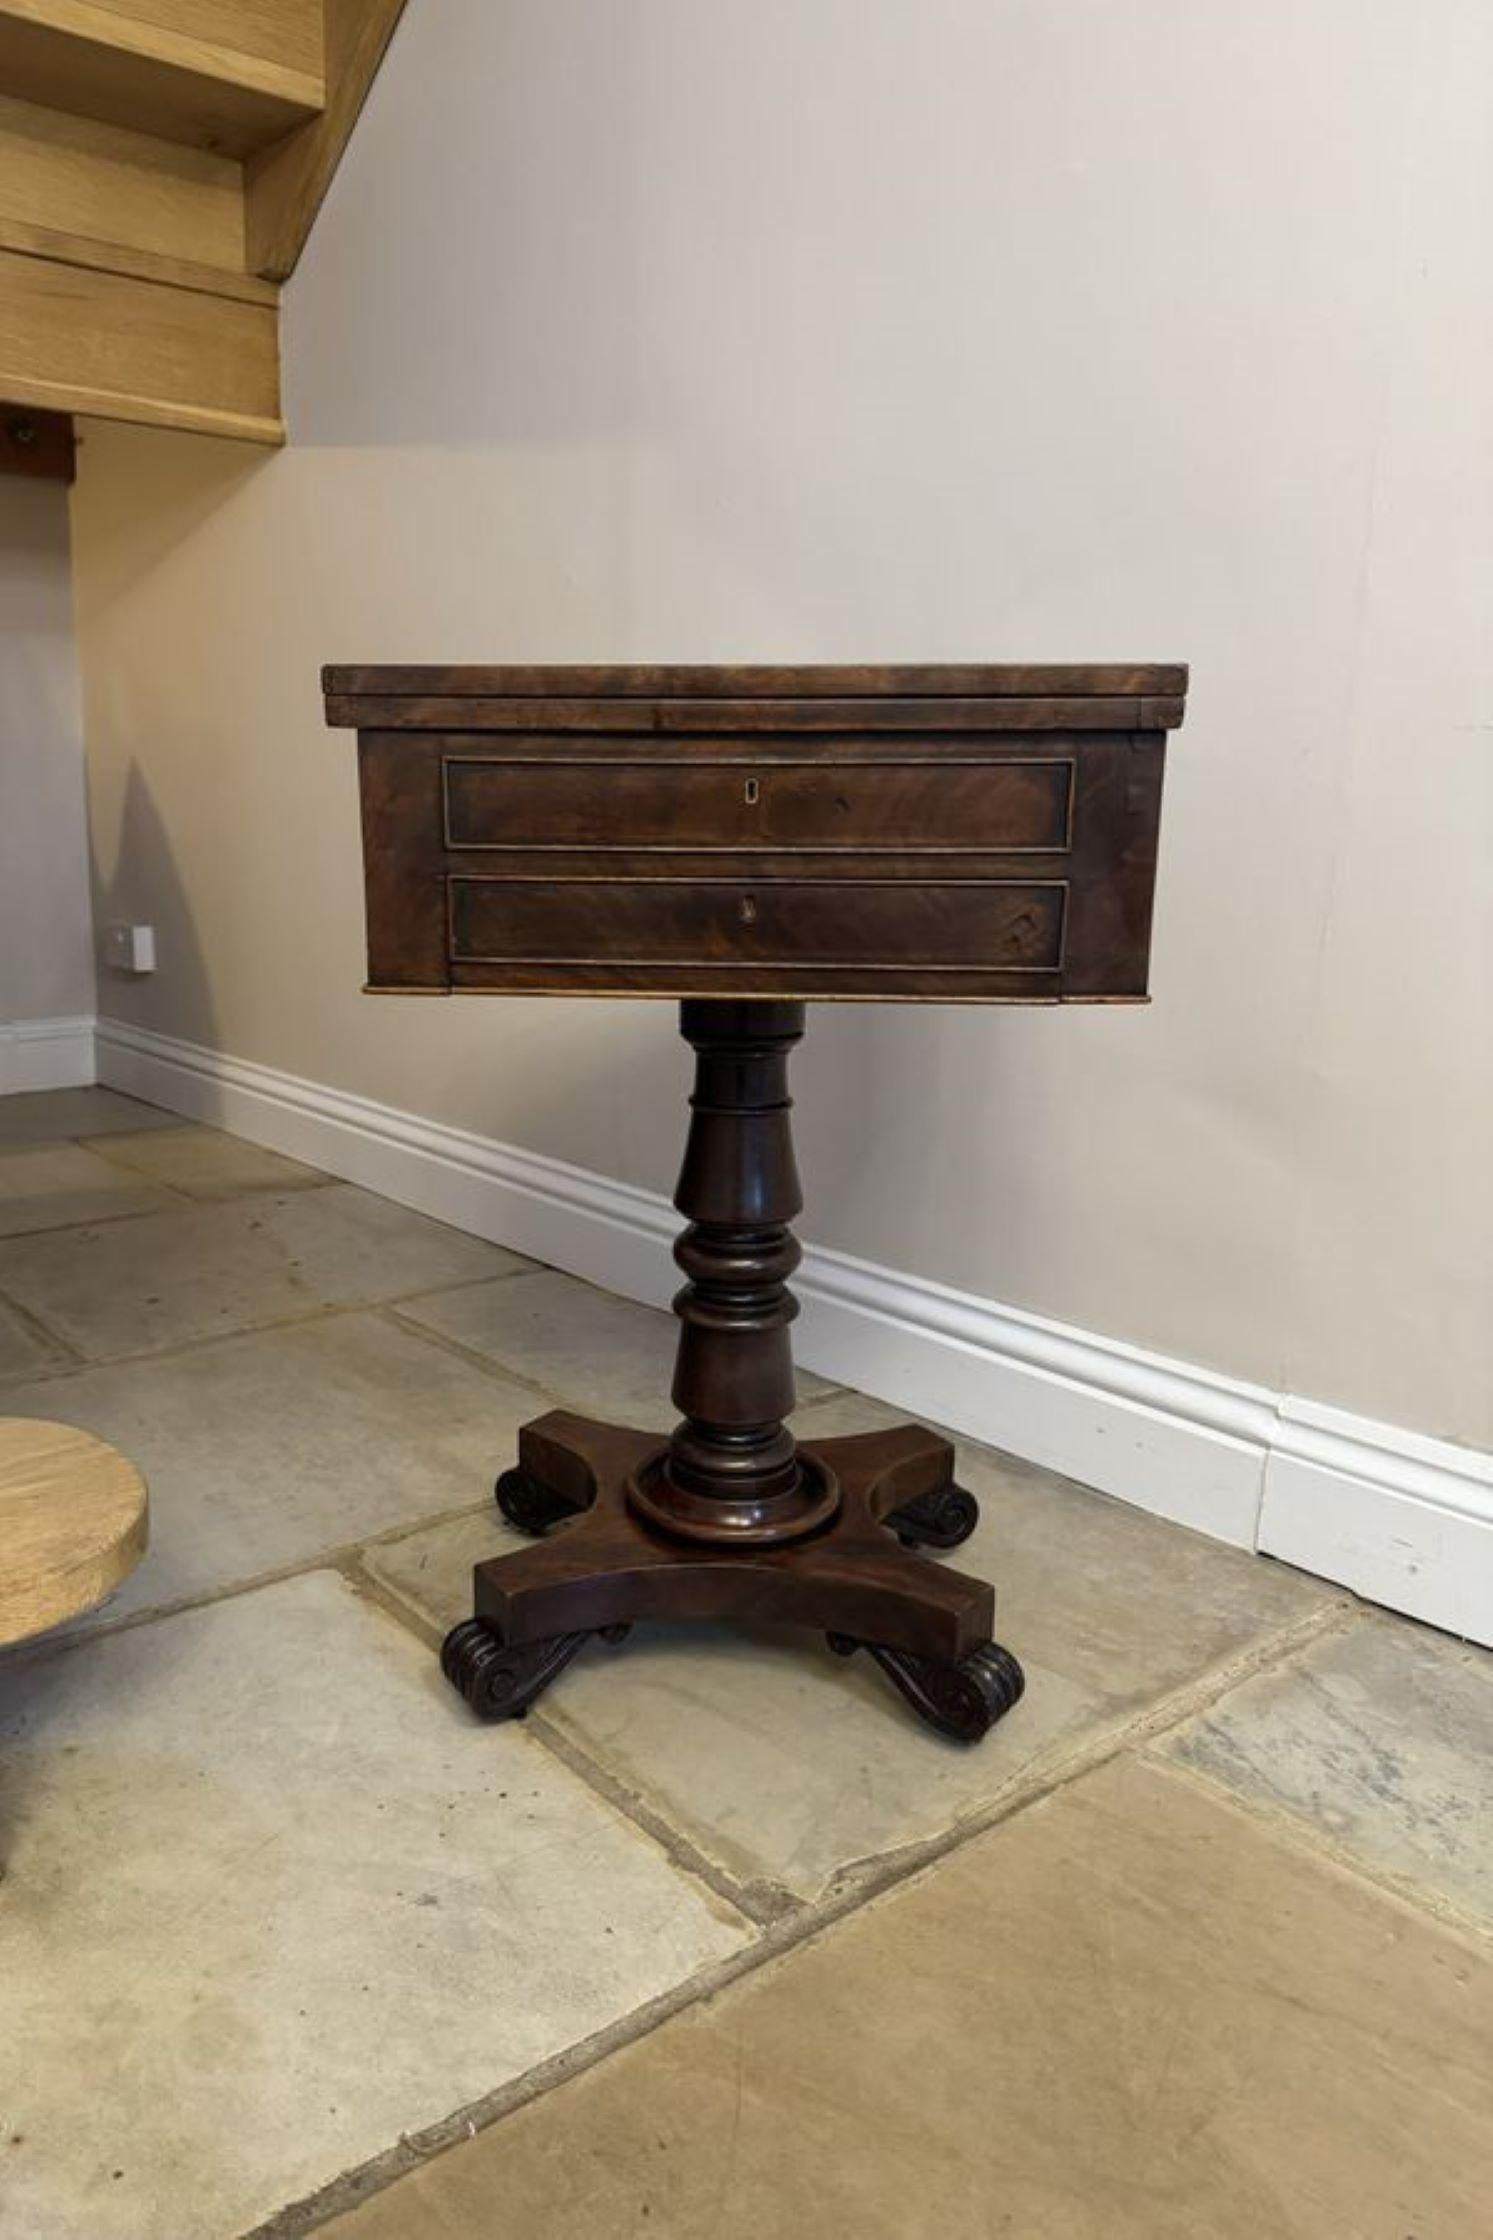 Quality antique Victorian mahogany freestanding games table, having a quality antique Victorian games table with a folding revolving baize lined top over a single drawer and dummy drawer front supported by a turned column raised on a platform base